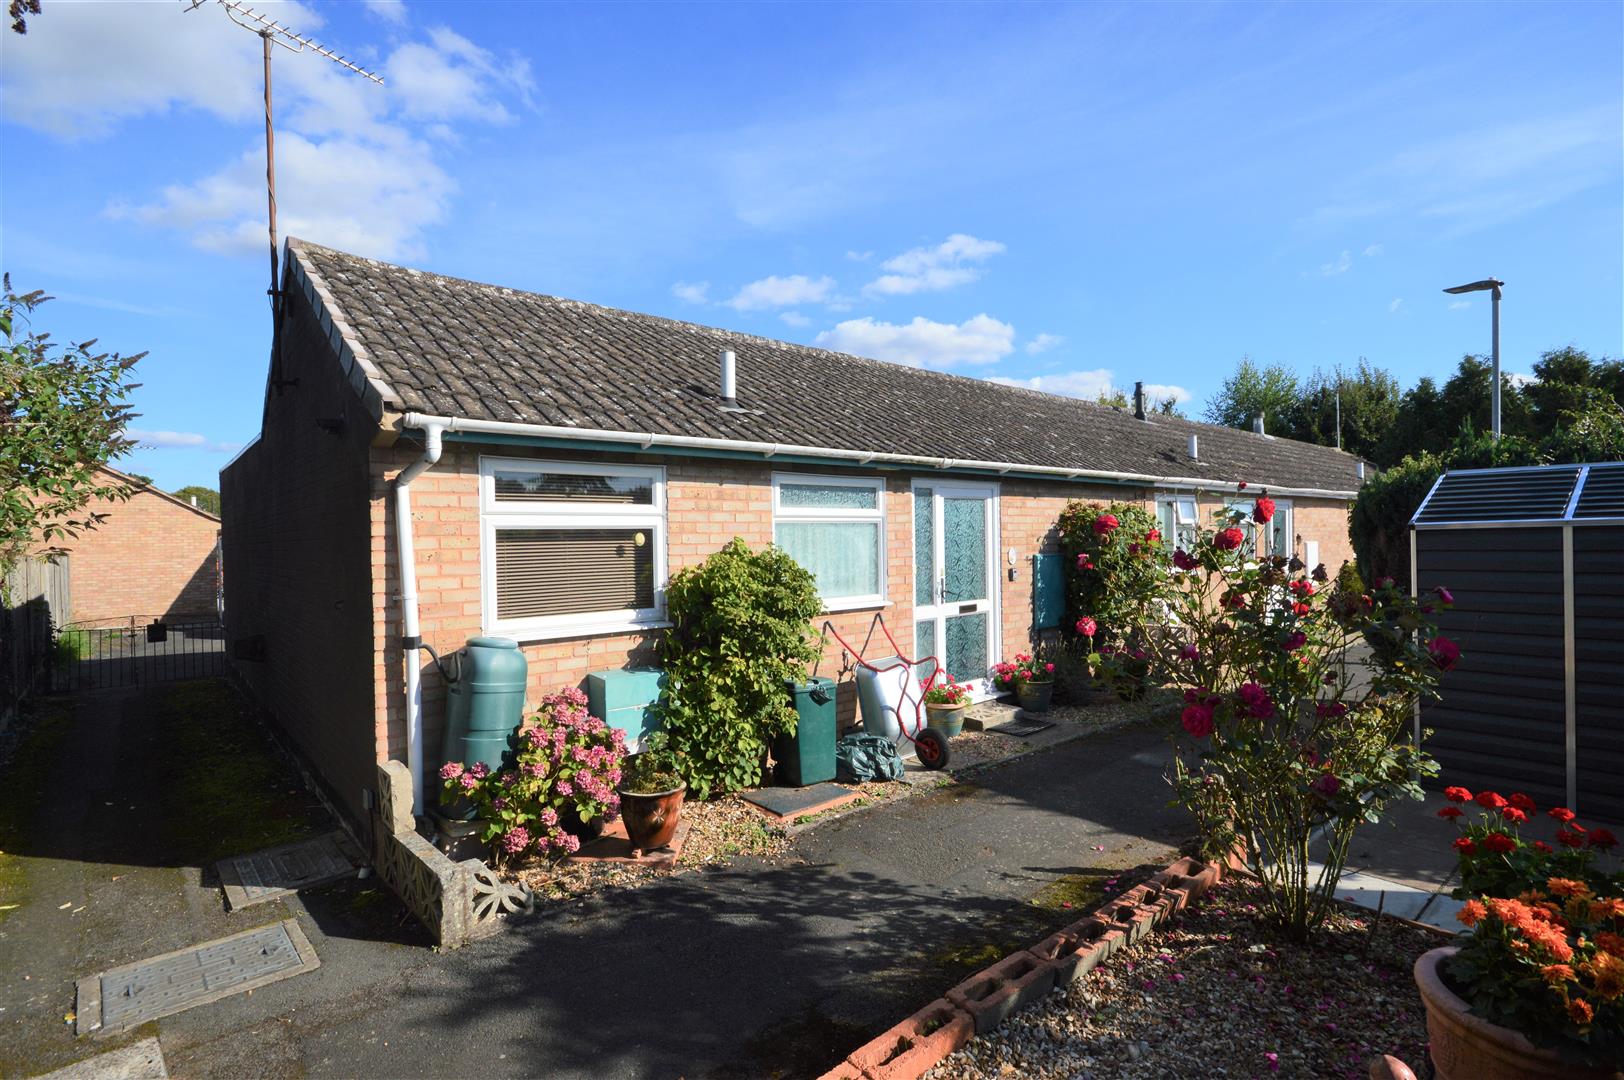 2 bed terraced bungalow for sale in Leominster, HR6